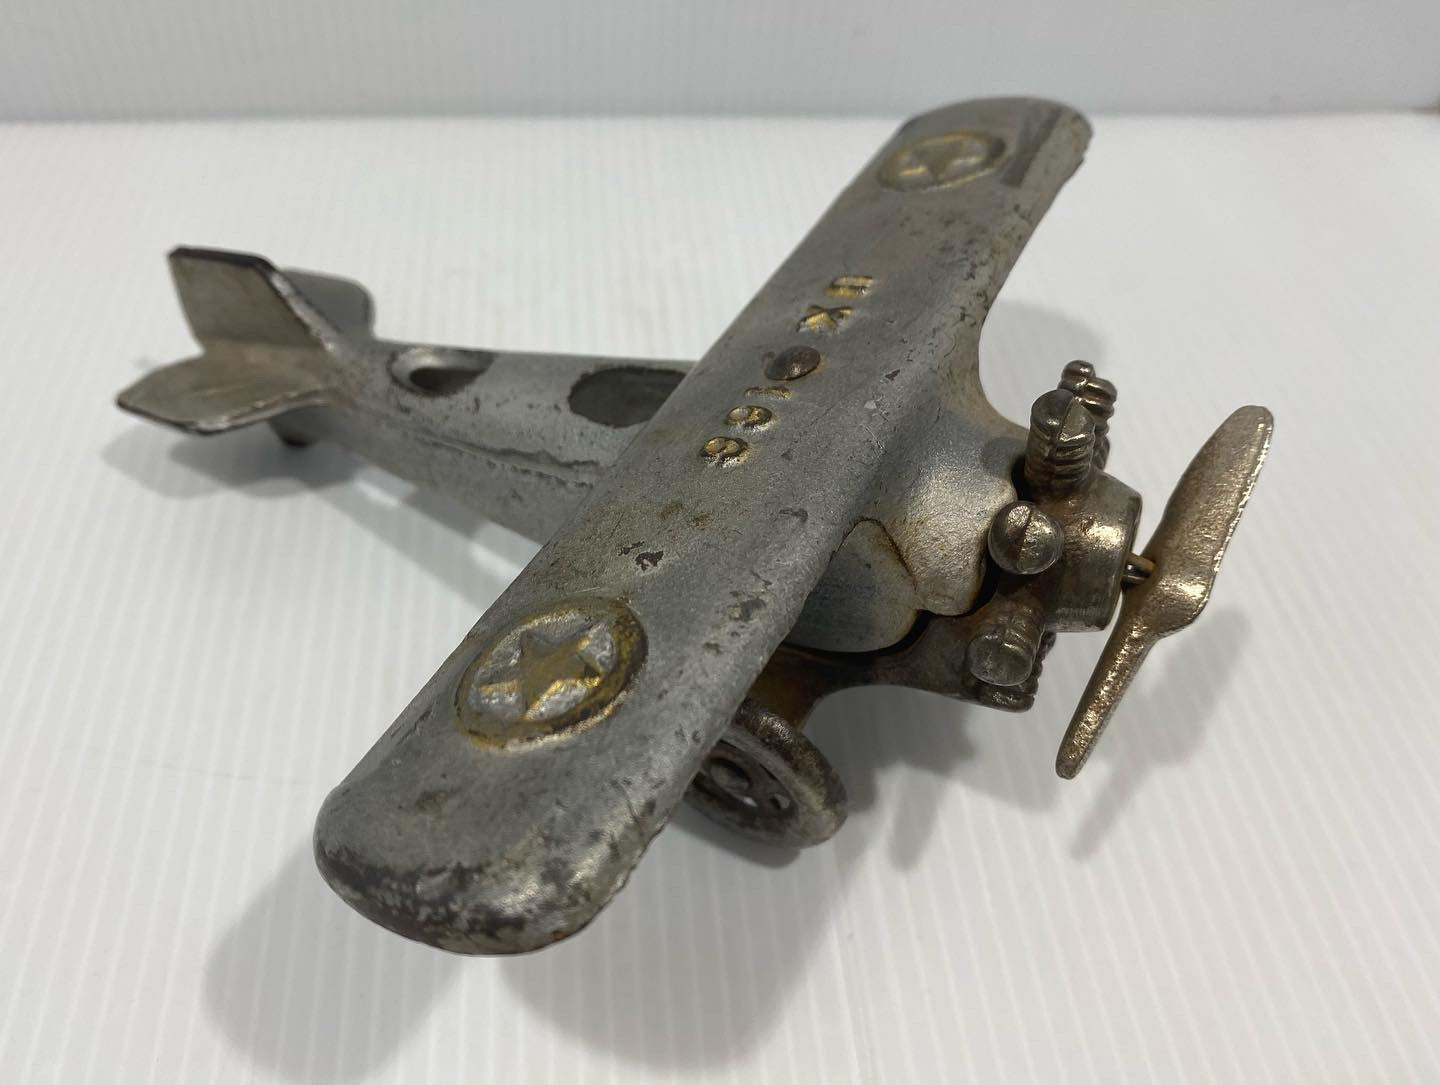 Antique 1920s A.C. Williams cast iron  UX166 Airplane. Very nice all original condition. No cracks or breaks. Excellent.